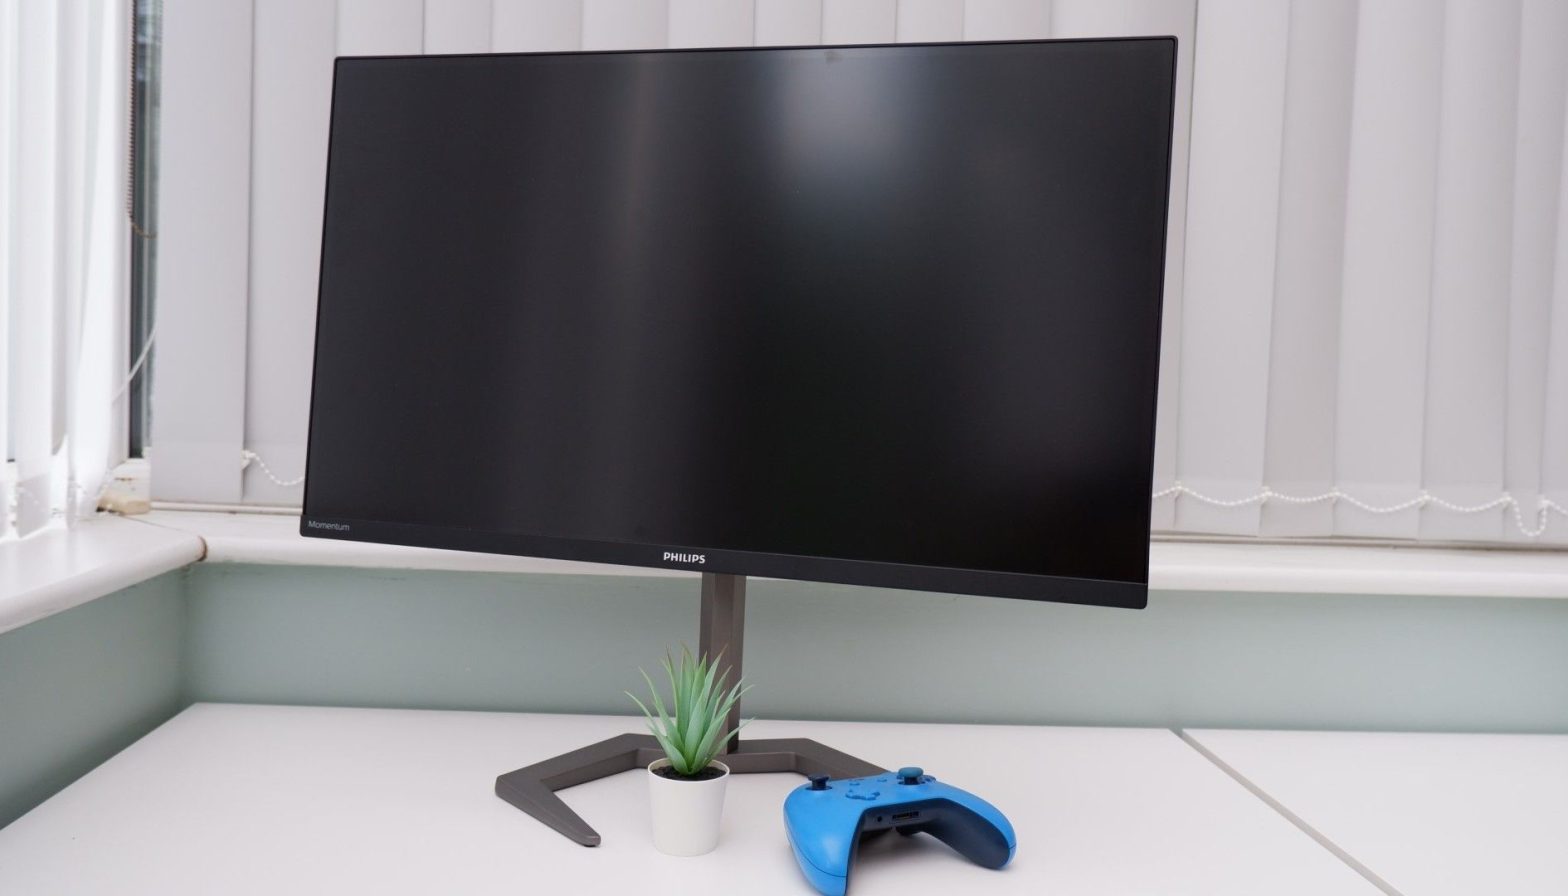 Philips Momentum 5000 M1N5500 Monitor Review